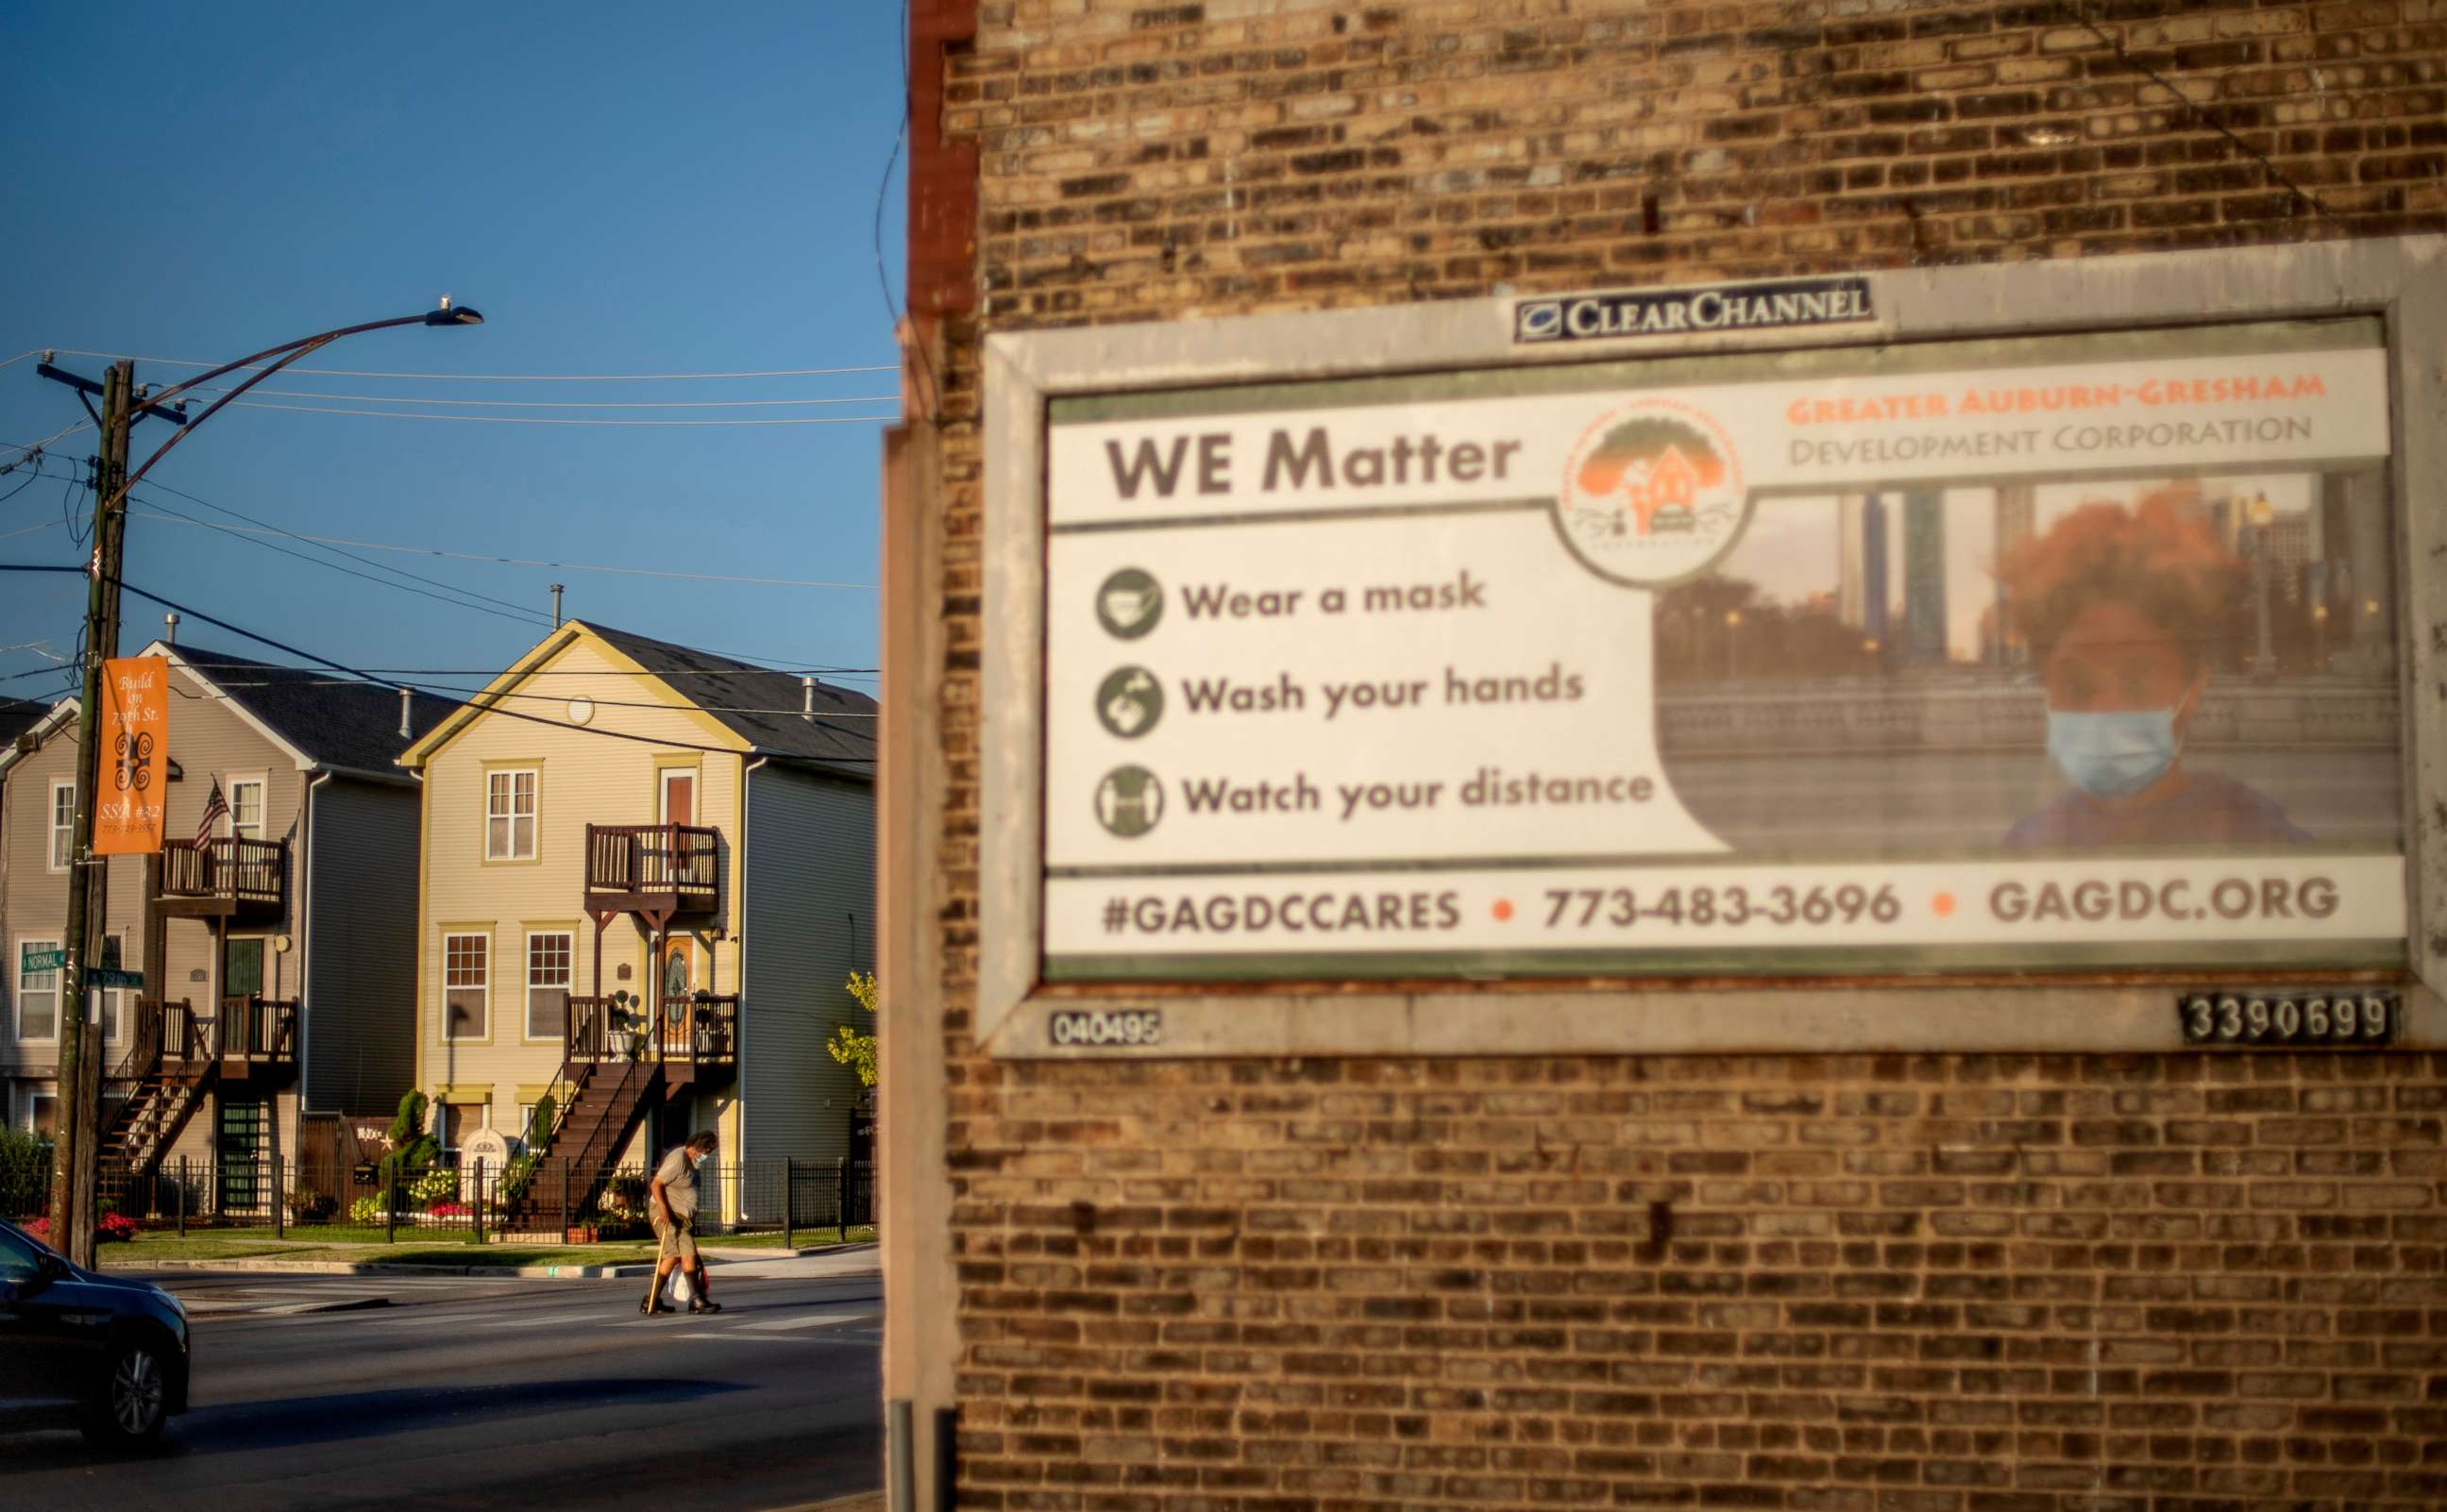 PHOTO: An elderly man crosses the street in the Auburn Gresham neighborhood next to a billboard promoting safety measures against COVID-19 in Chicago, Aug. 27, 2020.